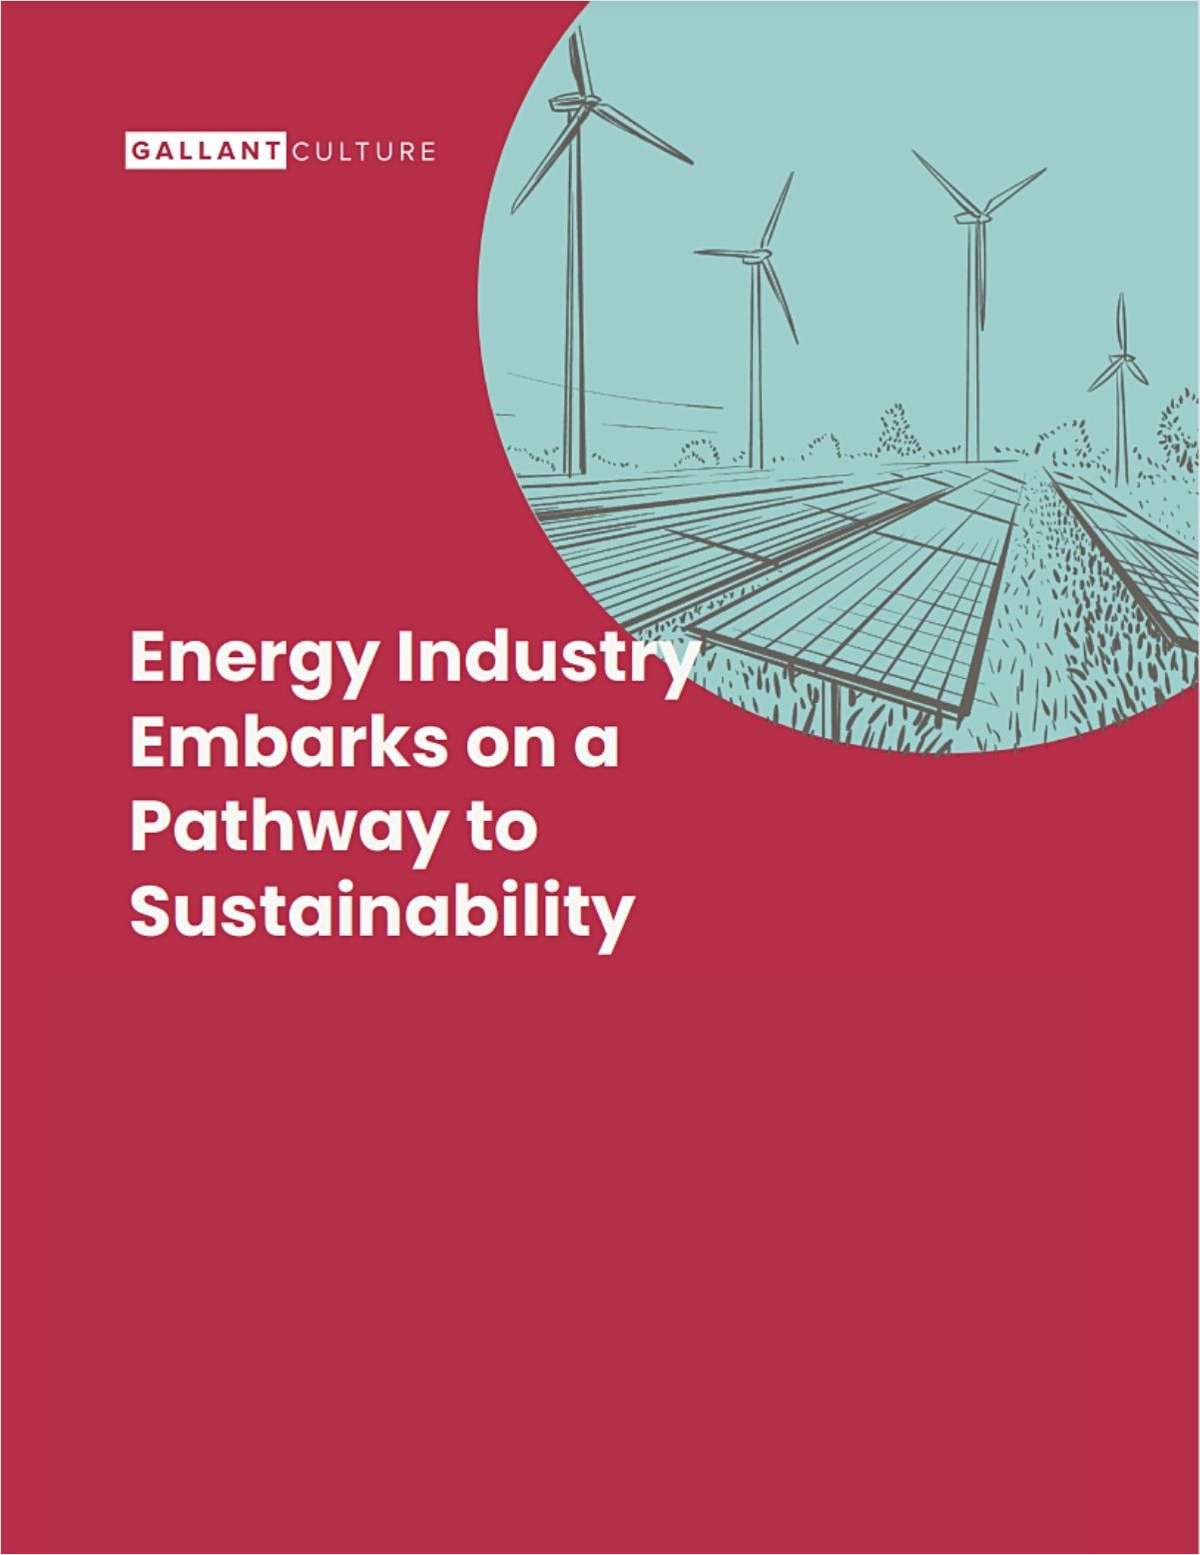 Energy Industry Embarks on a Pathway to Sustainability